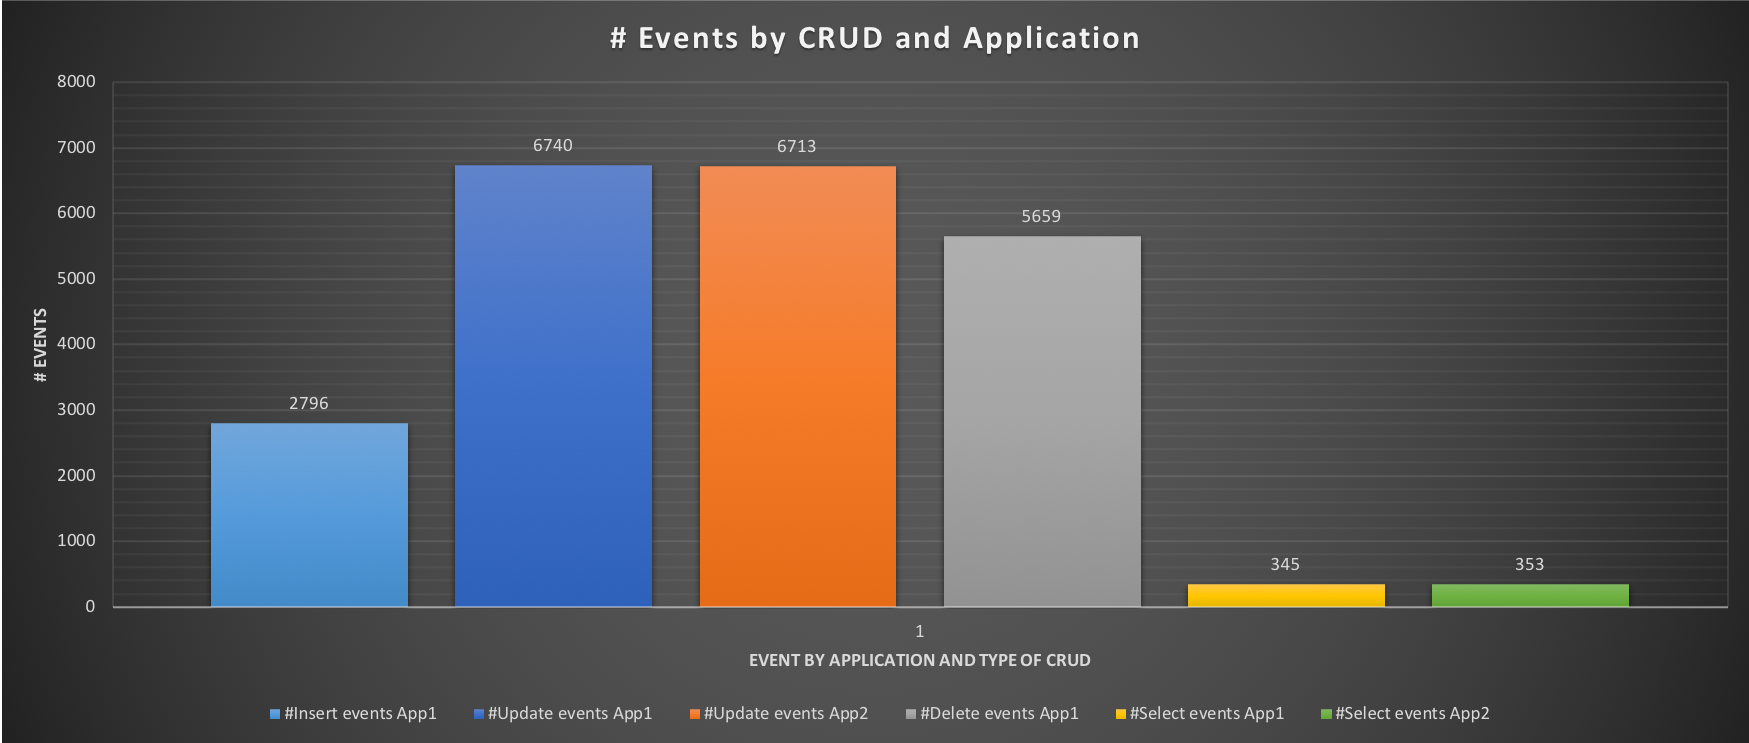 events_by_crud4